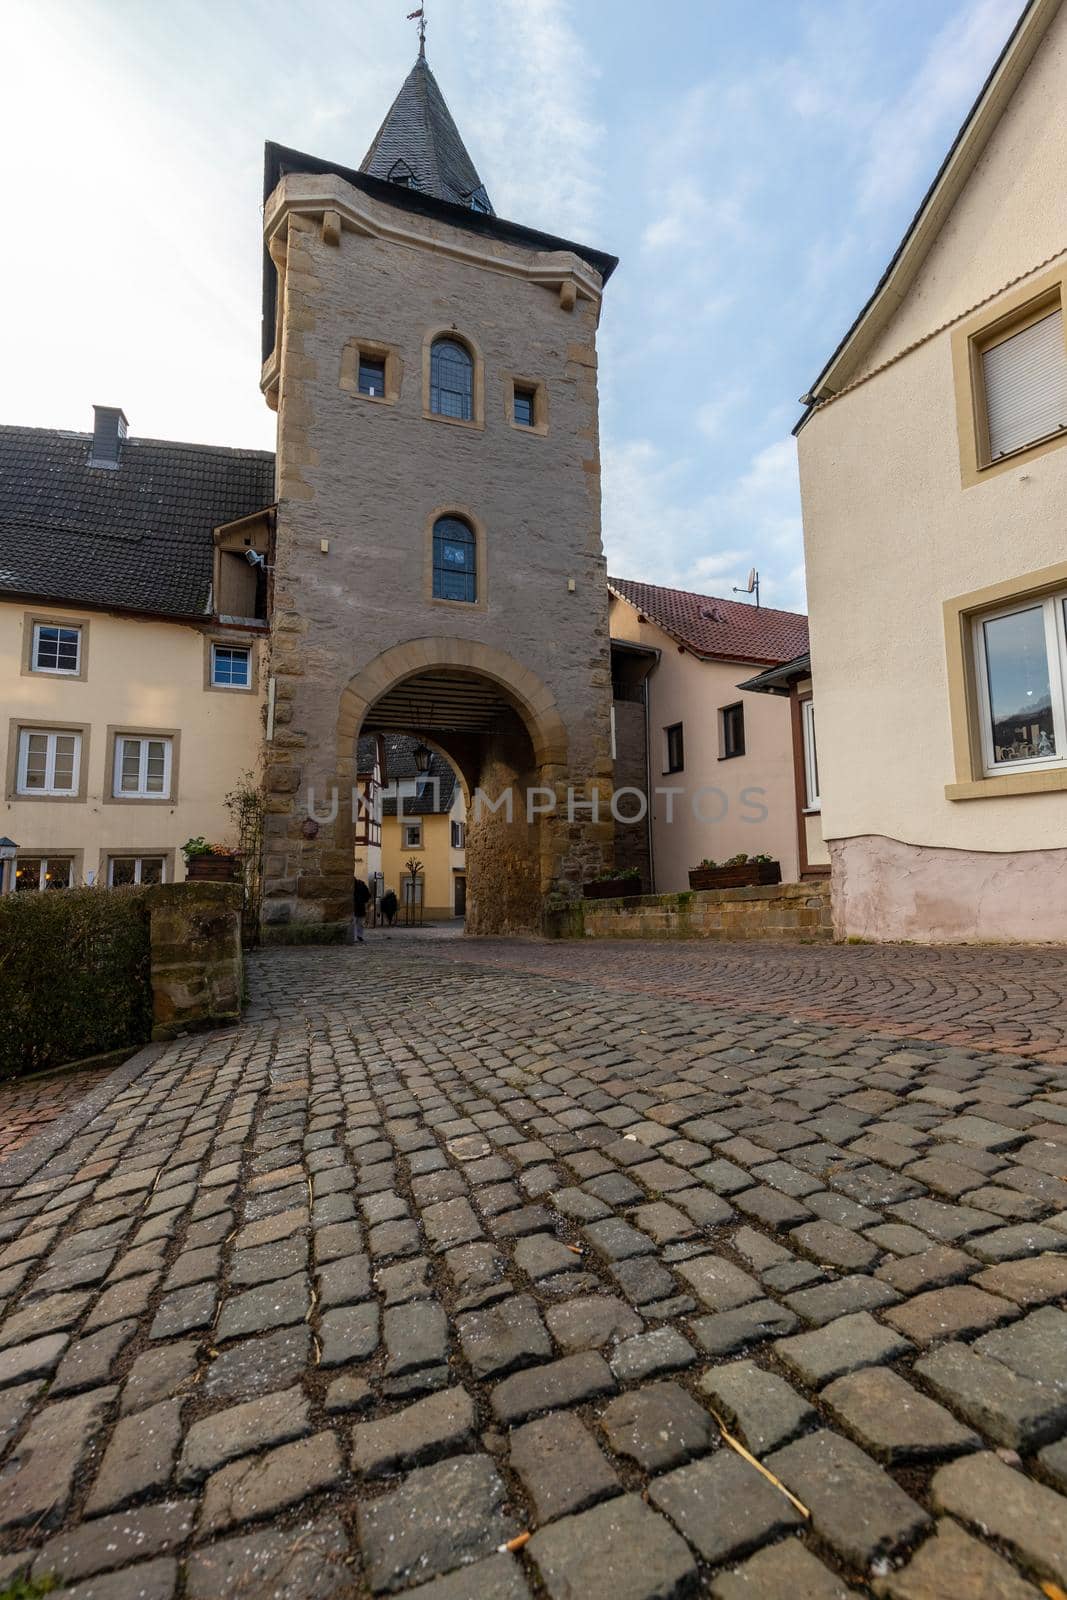 City gate Untertor in the historic old town of Meisenheim by reinerc